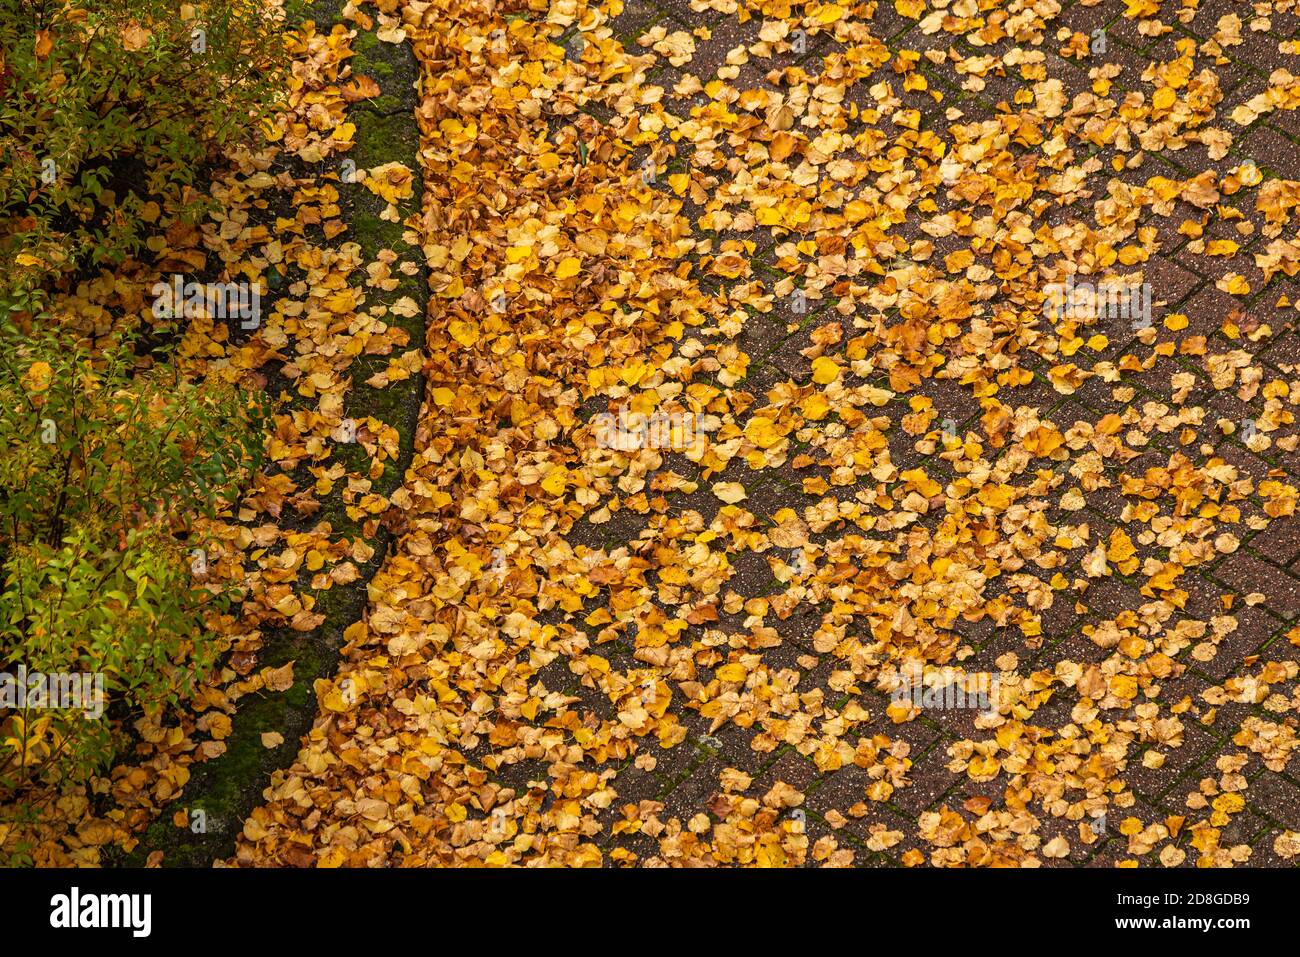 View from above of colorful autumn leaves in a parking lot Stock Photo